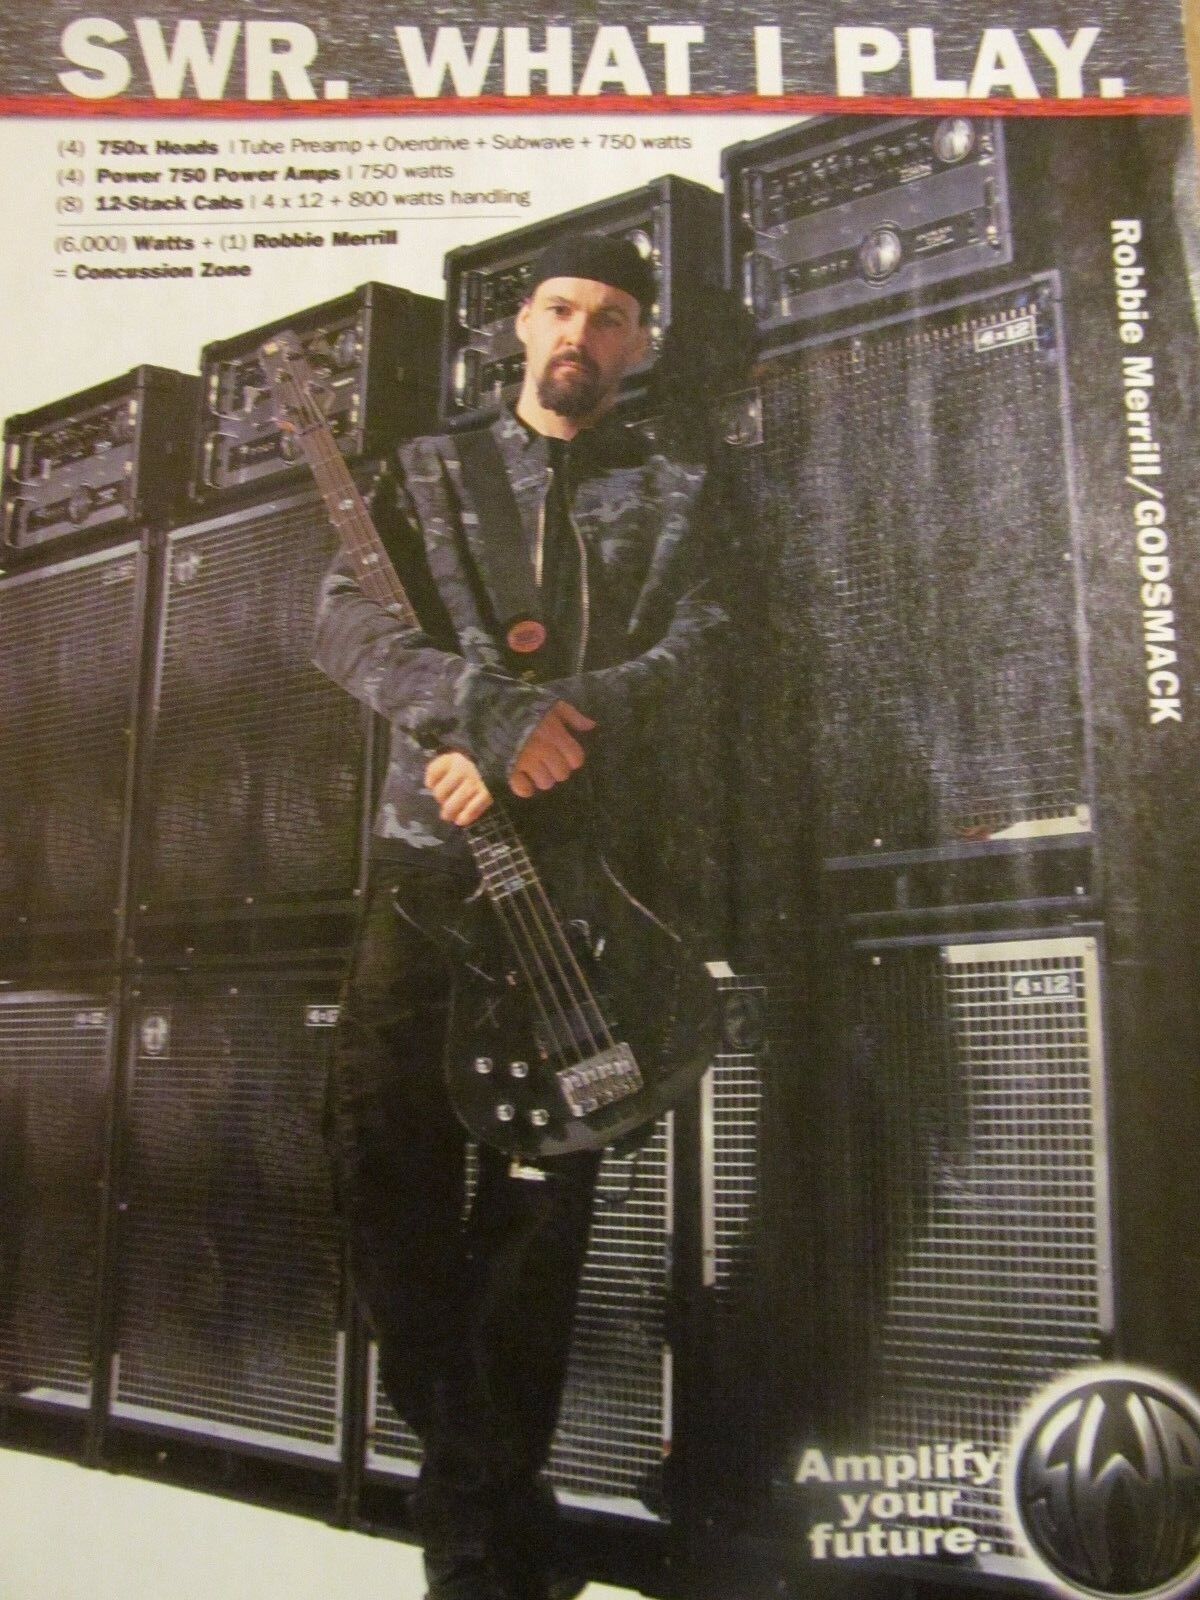 Godsmack, Robbie Merrill, SWR Amplifiers, Full Page Promotional Ad